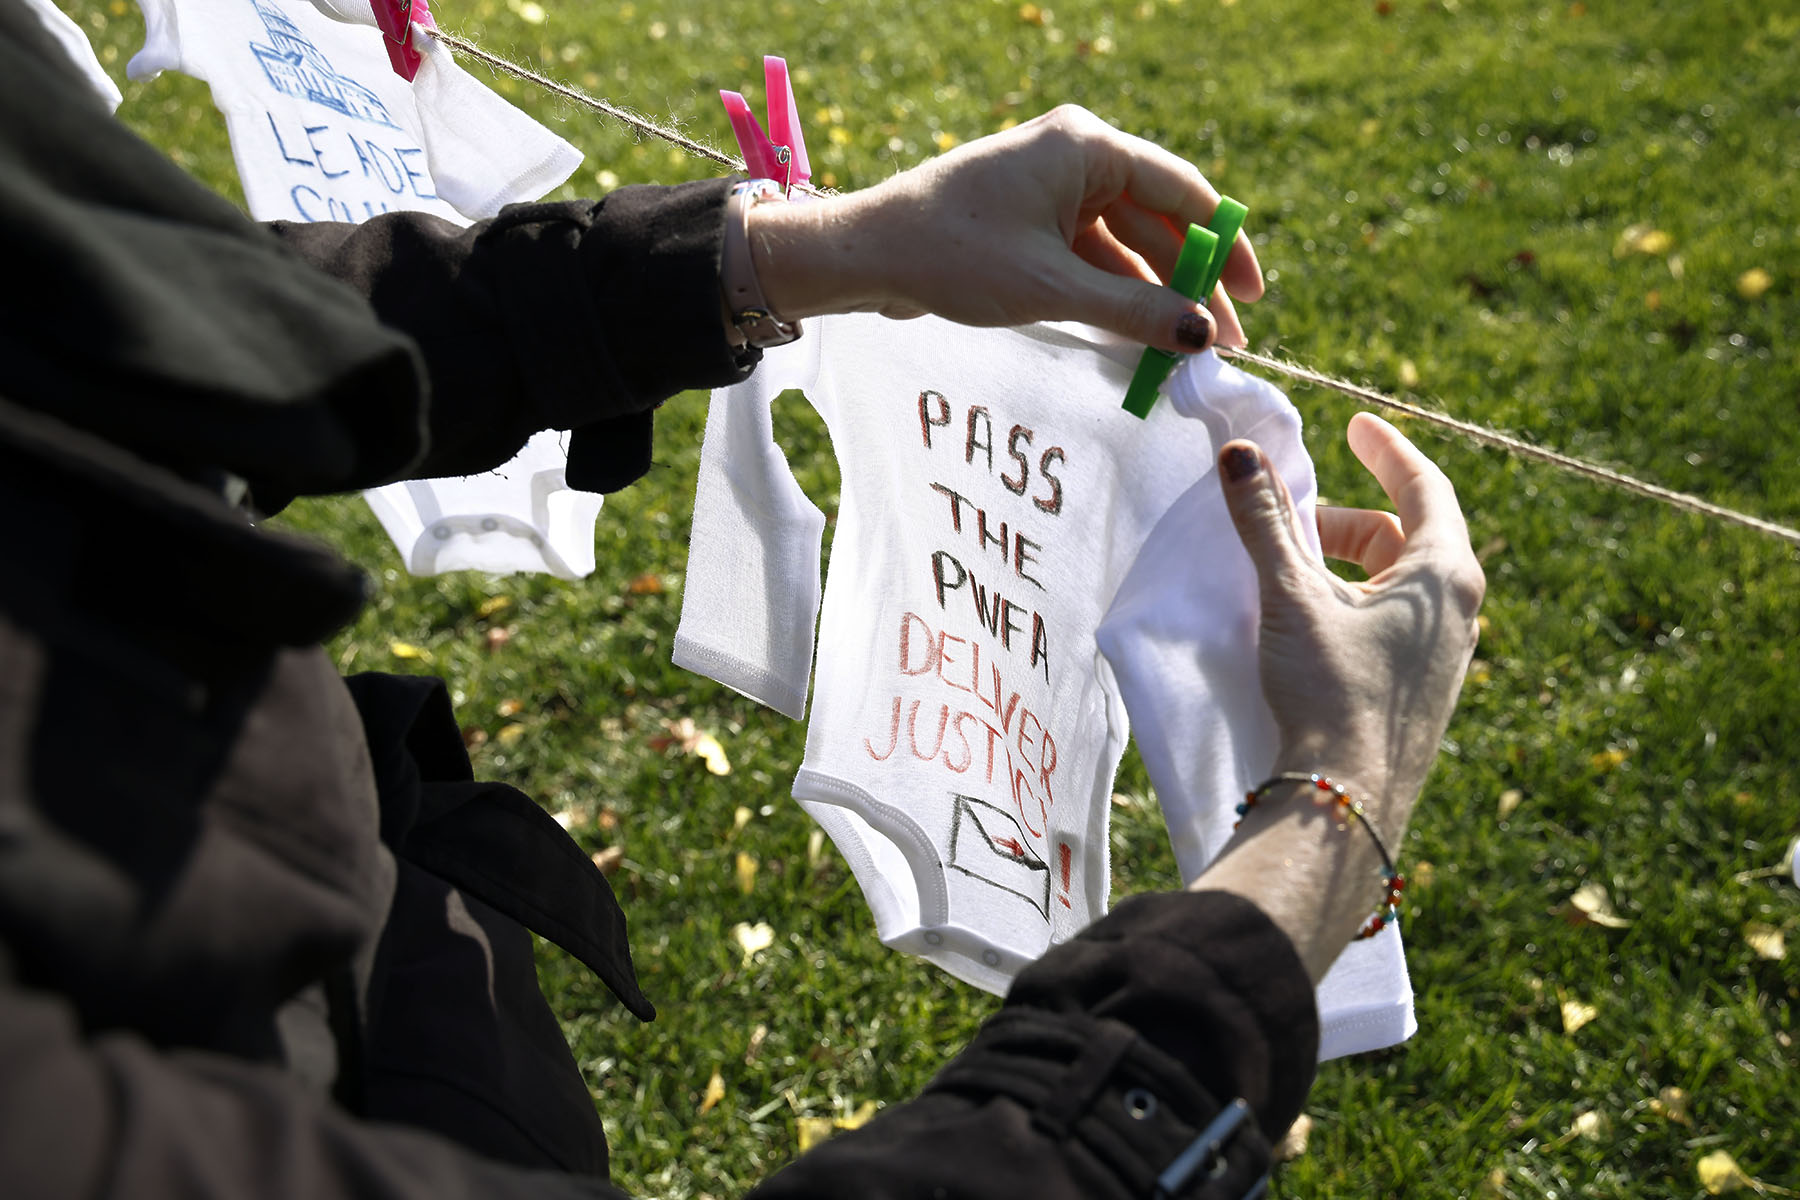 An activist pins a baby onesie with the words "pass the PWFA - Deliver Justice" written on it to a clothing line during a rally.